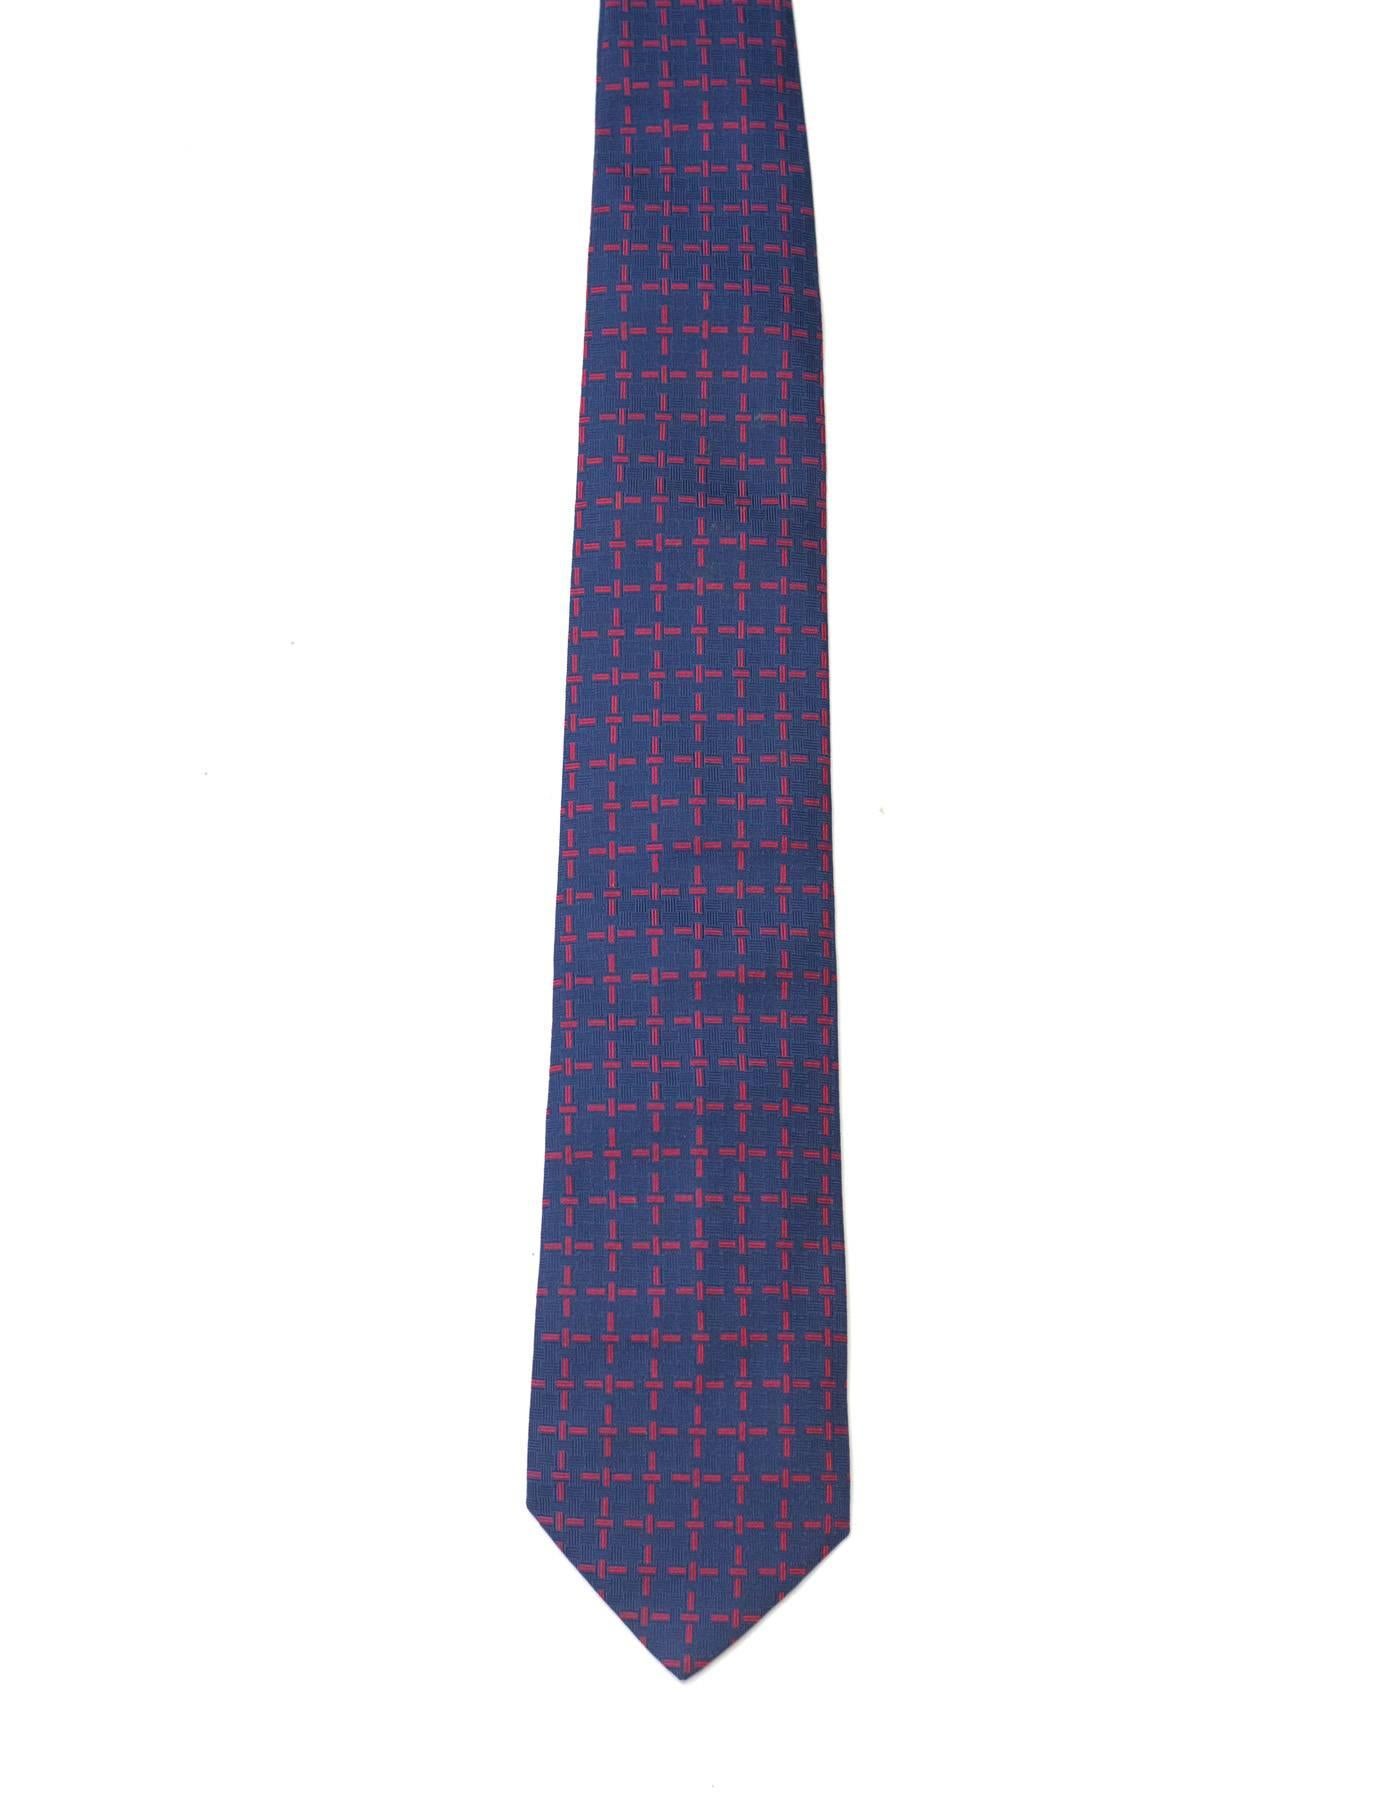 Hermes Navy & Red Stitch Print Silk Tie

Made In: France
Color: Navy and red
Composition: 100% silk
Overall Condition: Excellent pre-owned condition with the exception of some faint soiling on one patch of tie
Measurements: 
Length: